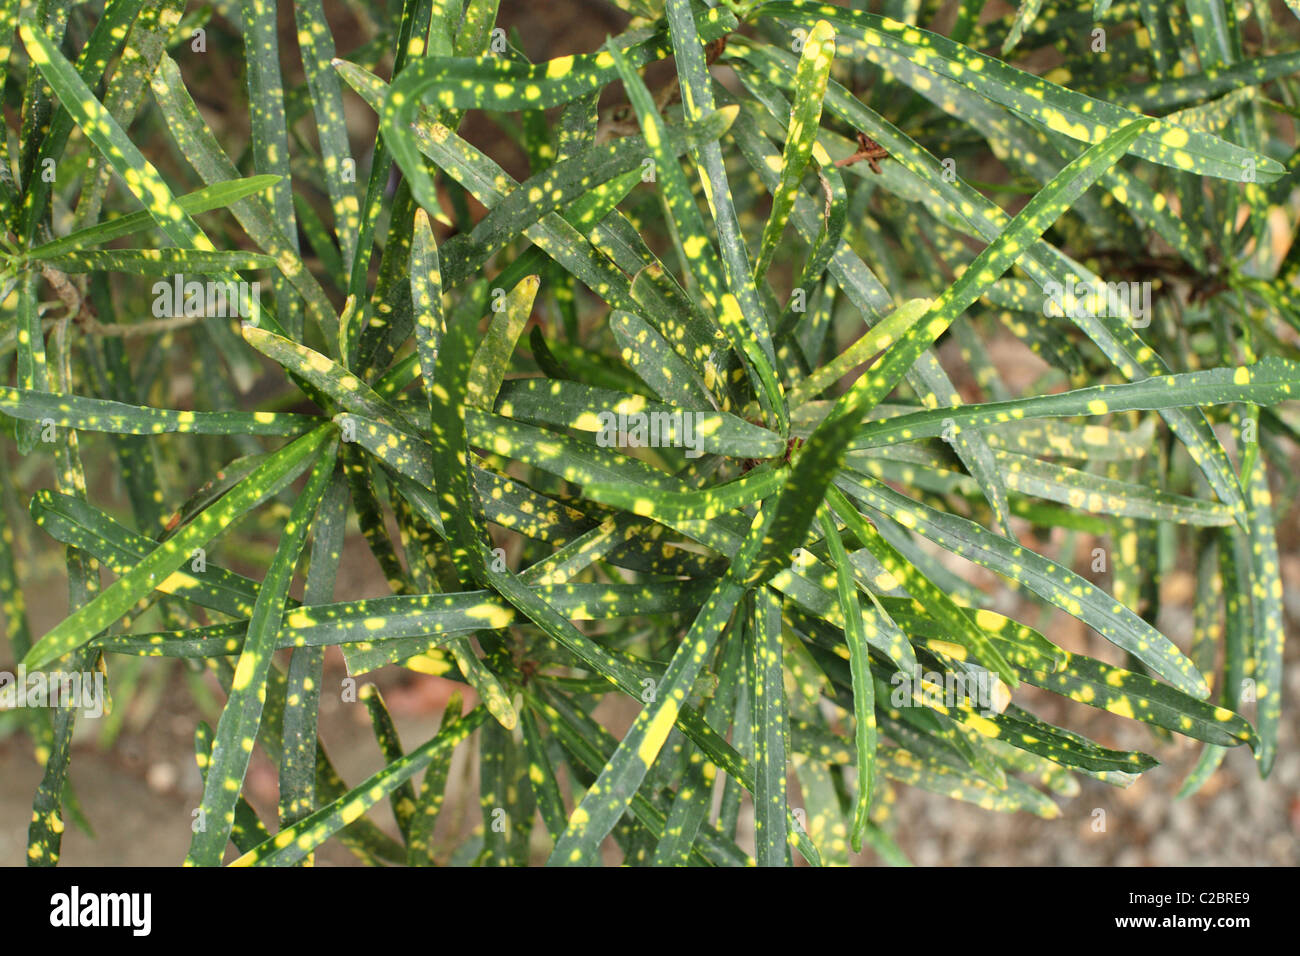 Tropical green leaves with yellow spots